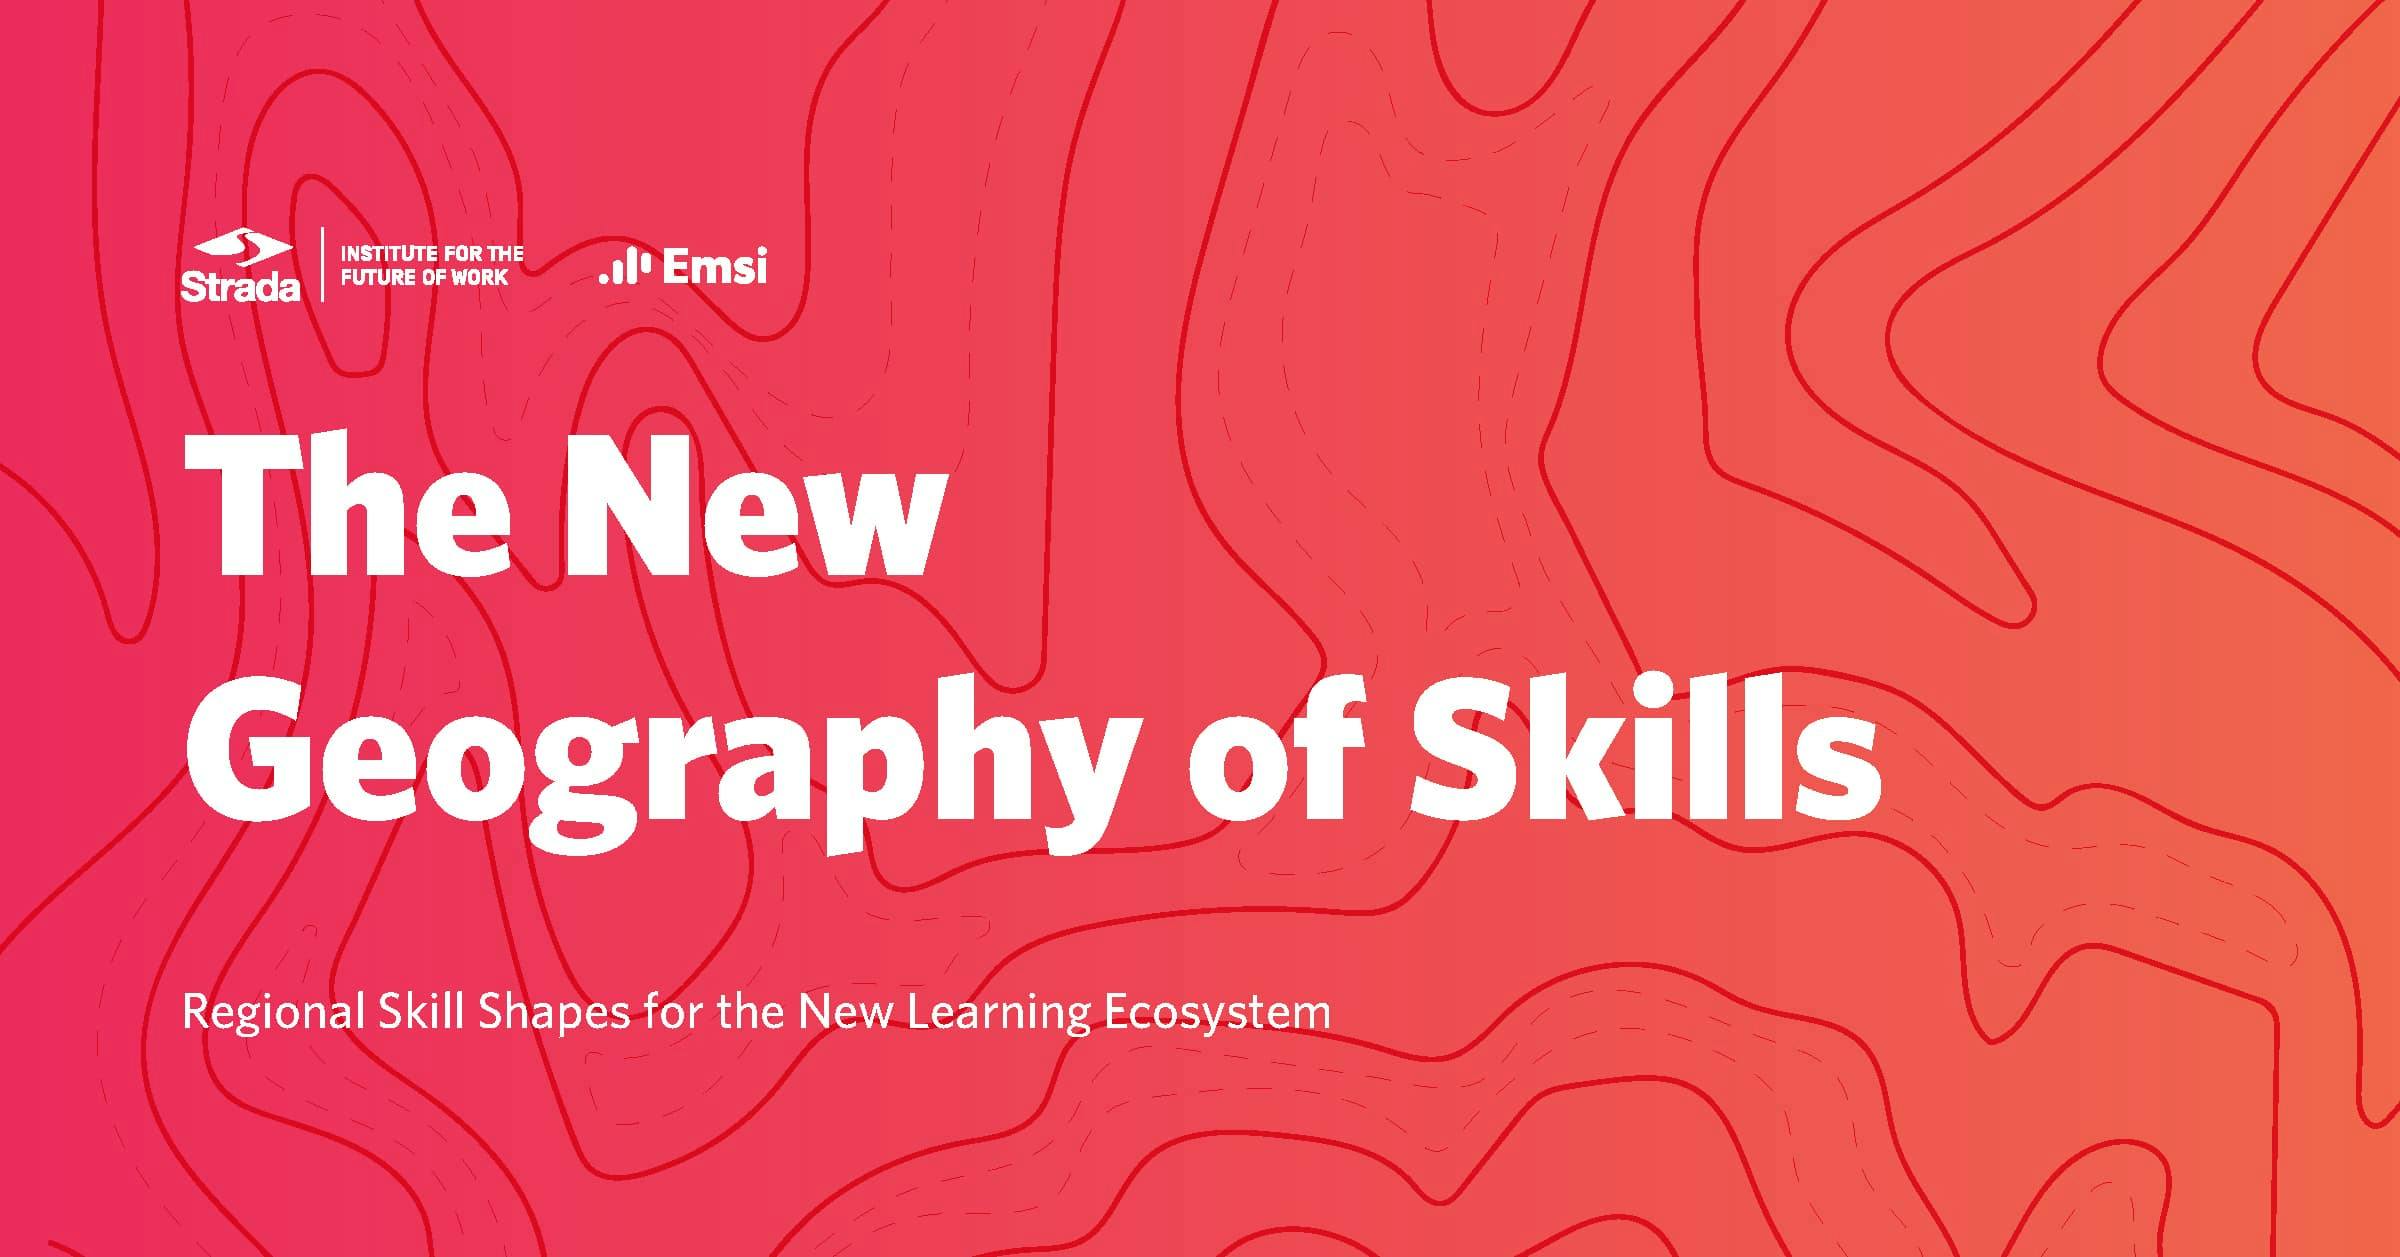 A New Geography of Skills